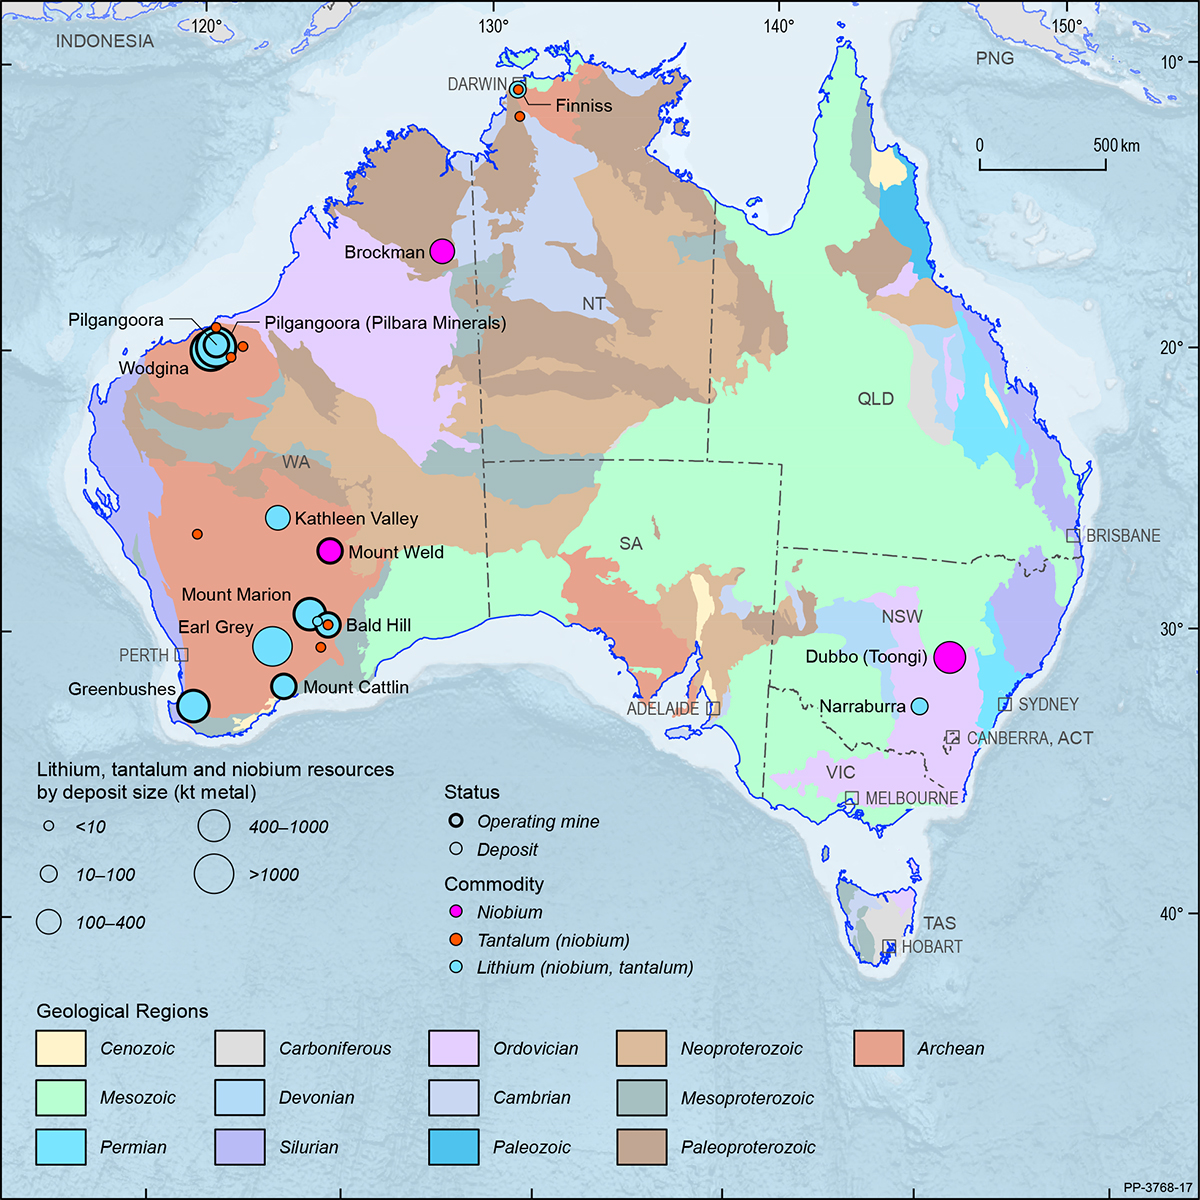 A map showing the Australian continent shaded by the ages of the main geological provinces highlighting the geographical distribution of Australian lithium, tantalum and niobium deposits and operating mines in 2019.